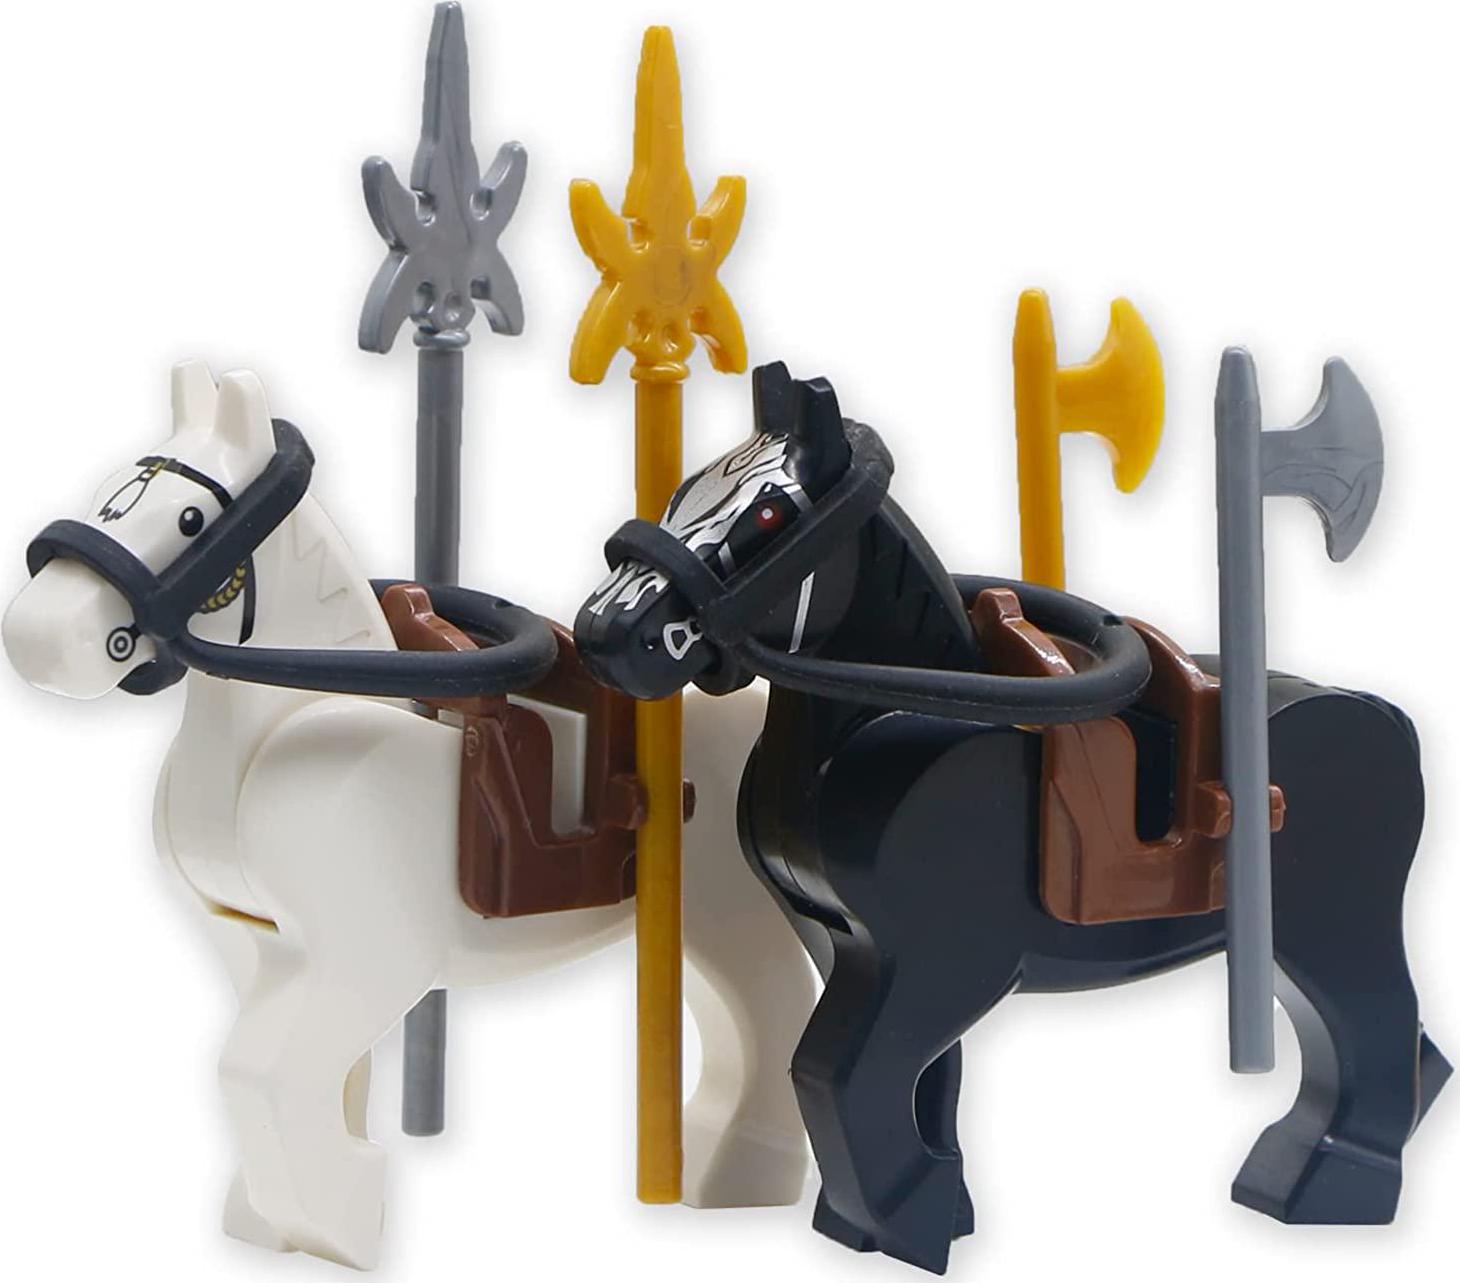 BroTex, Knights People Accessories Building Block - Medieval Weapon Armor Swords Helmet Horse, Castle Knight Shield Spear, MOC Bricks Parts Toys Sets for Boys